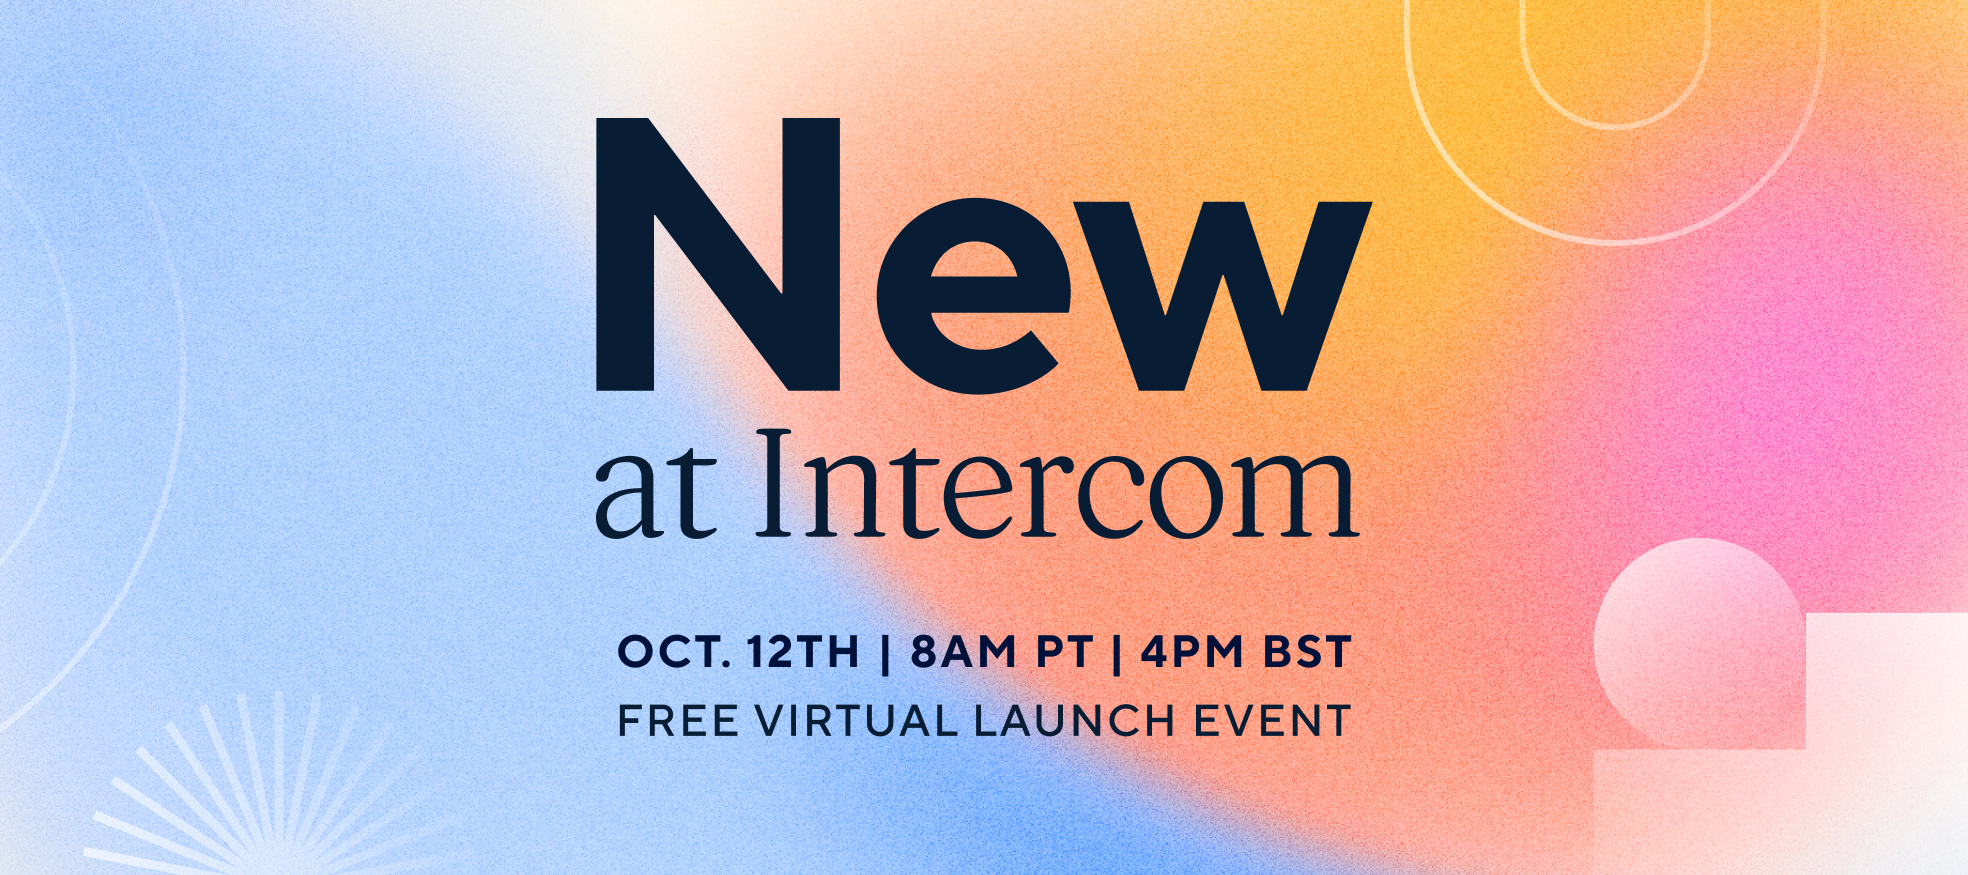 Registration is now open for New at Intercom Event.